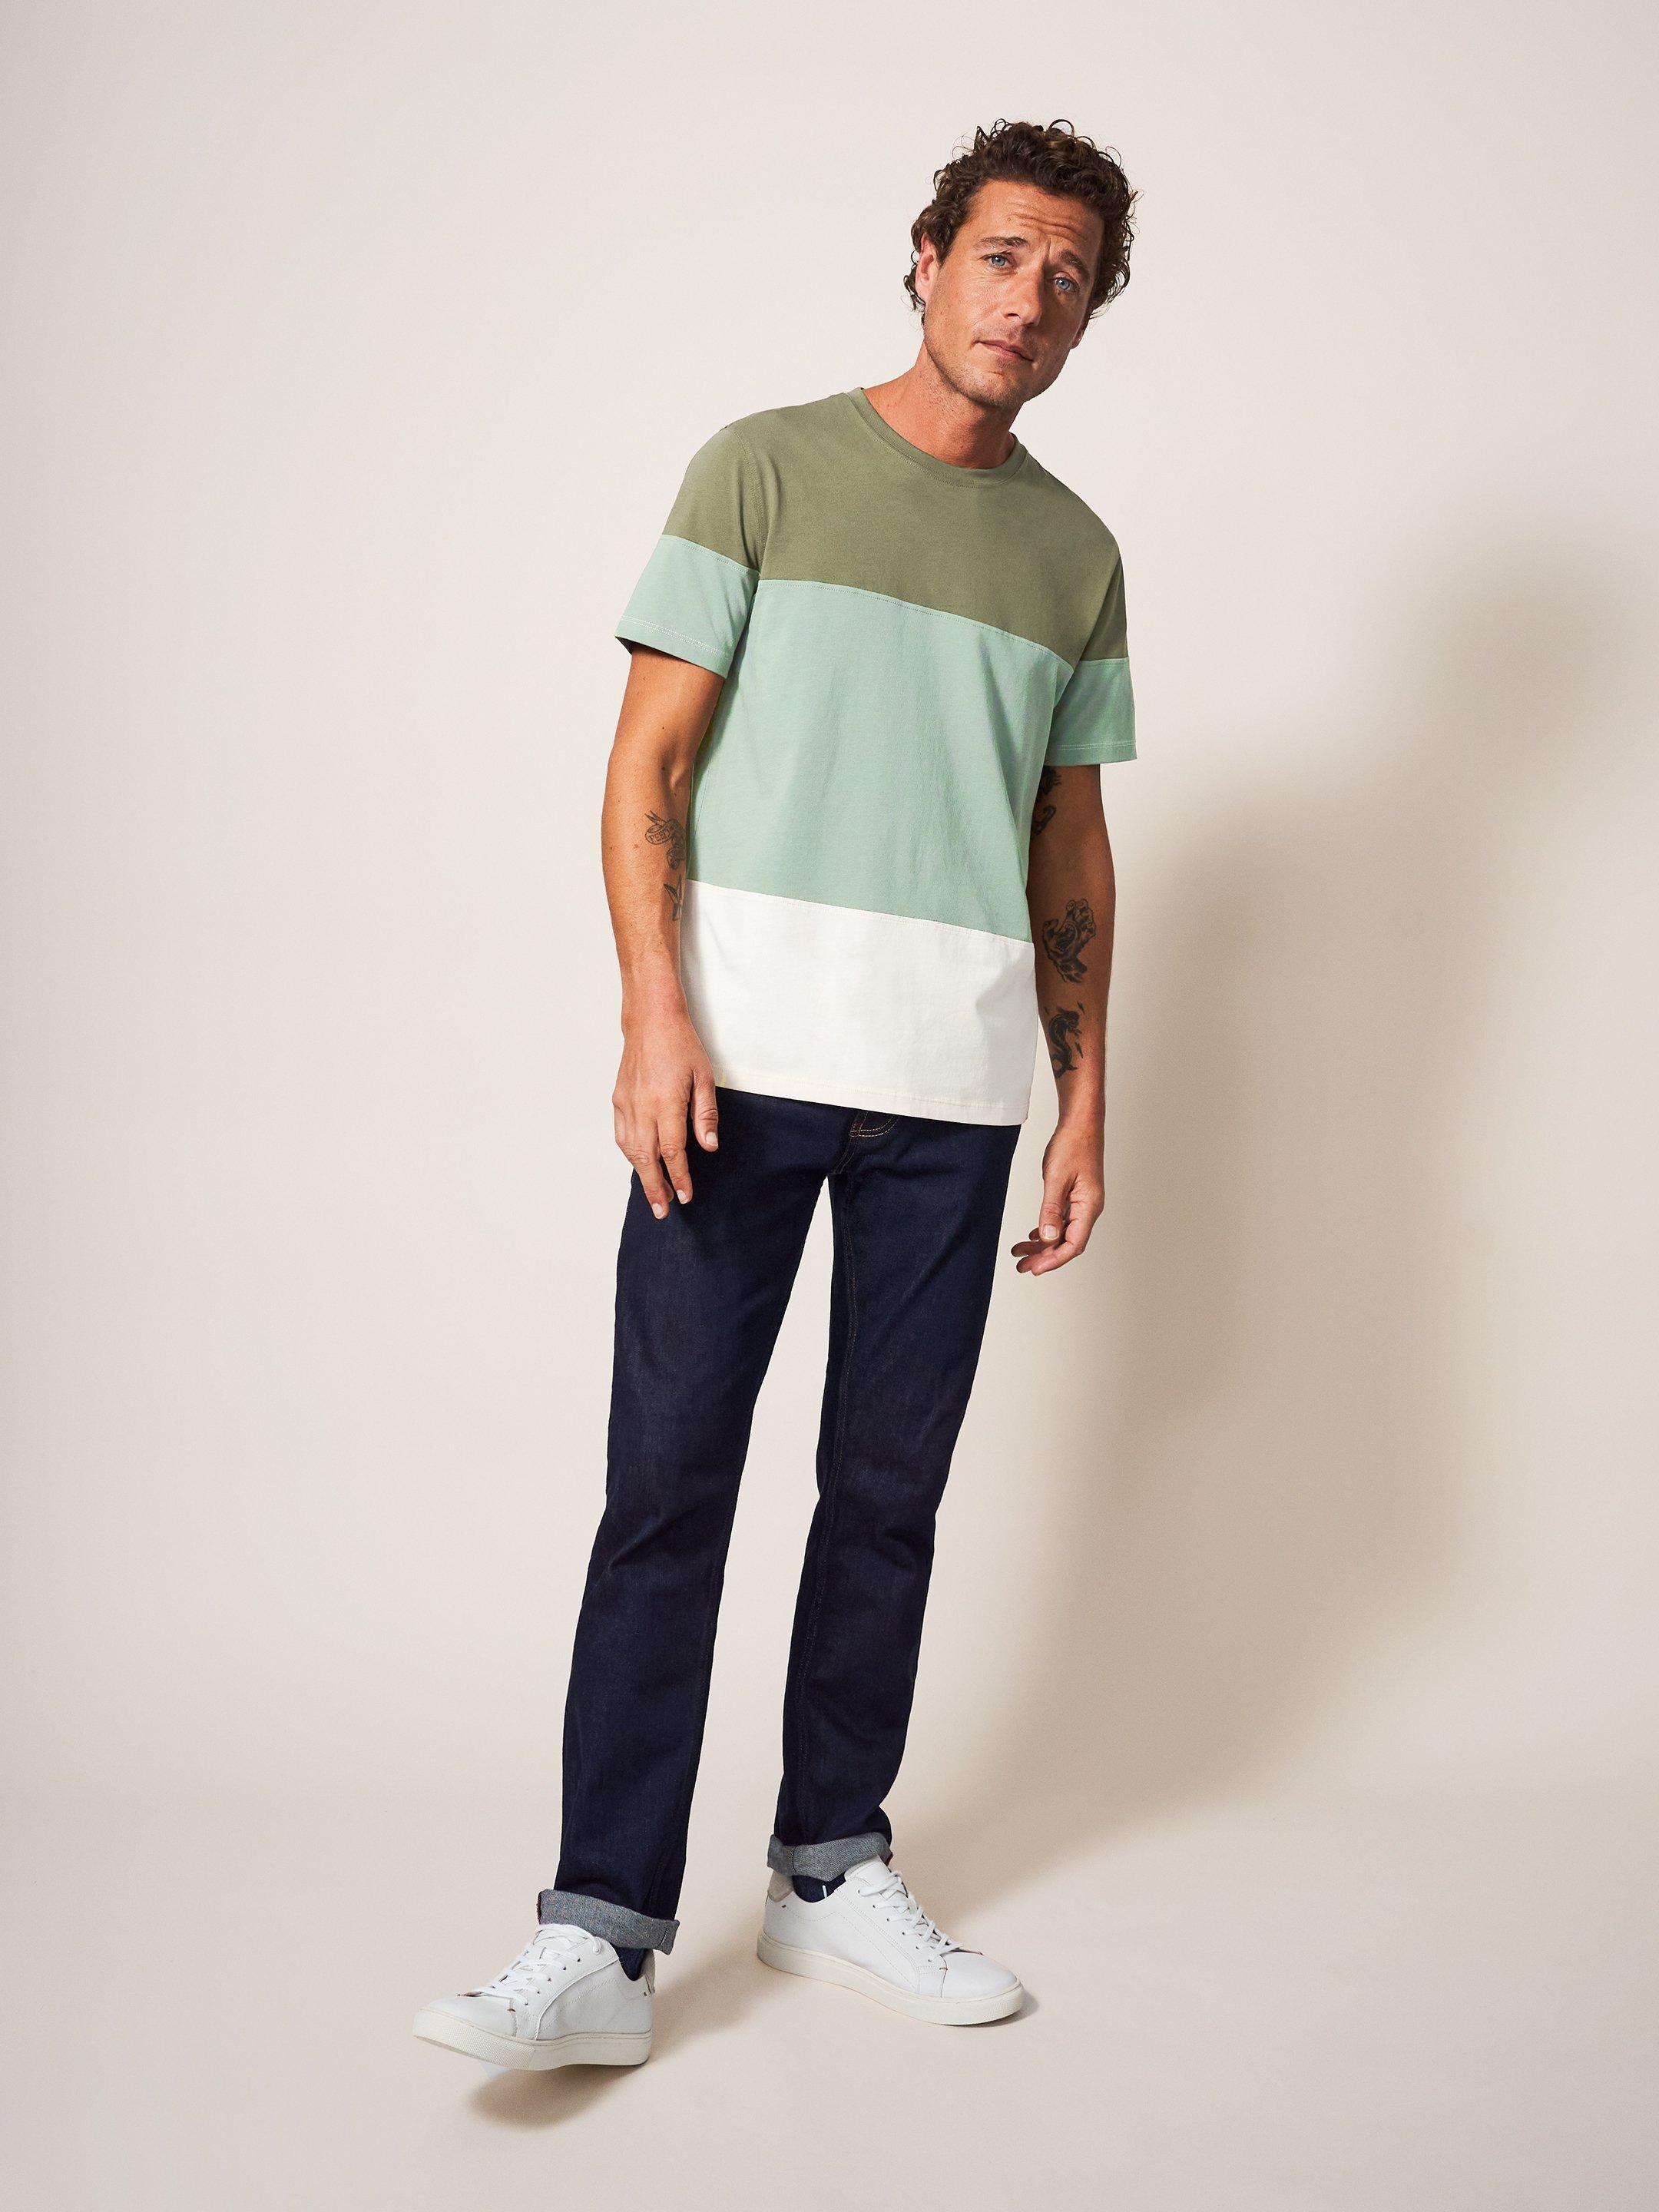 Linwood Colourblock SS Tee in DUS GREEN - MODEL FRONT